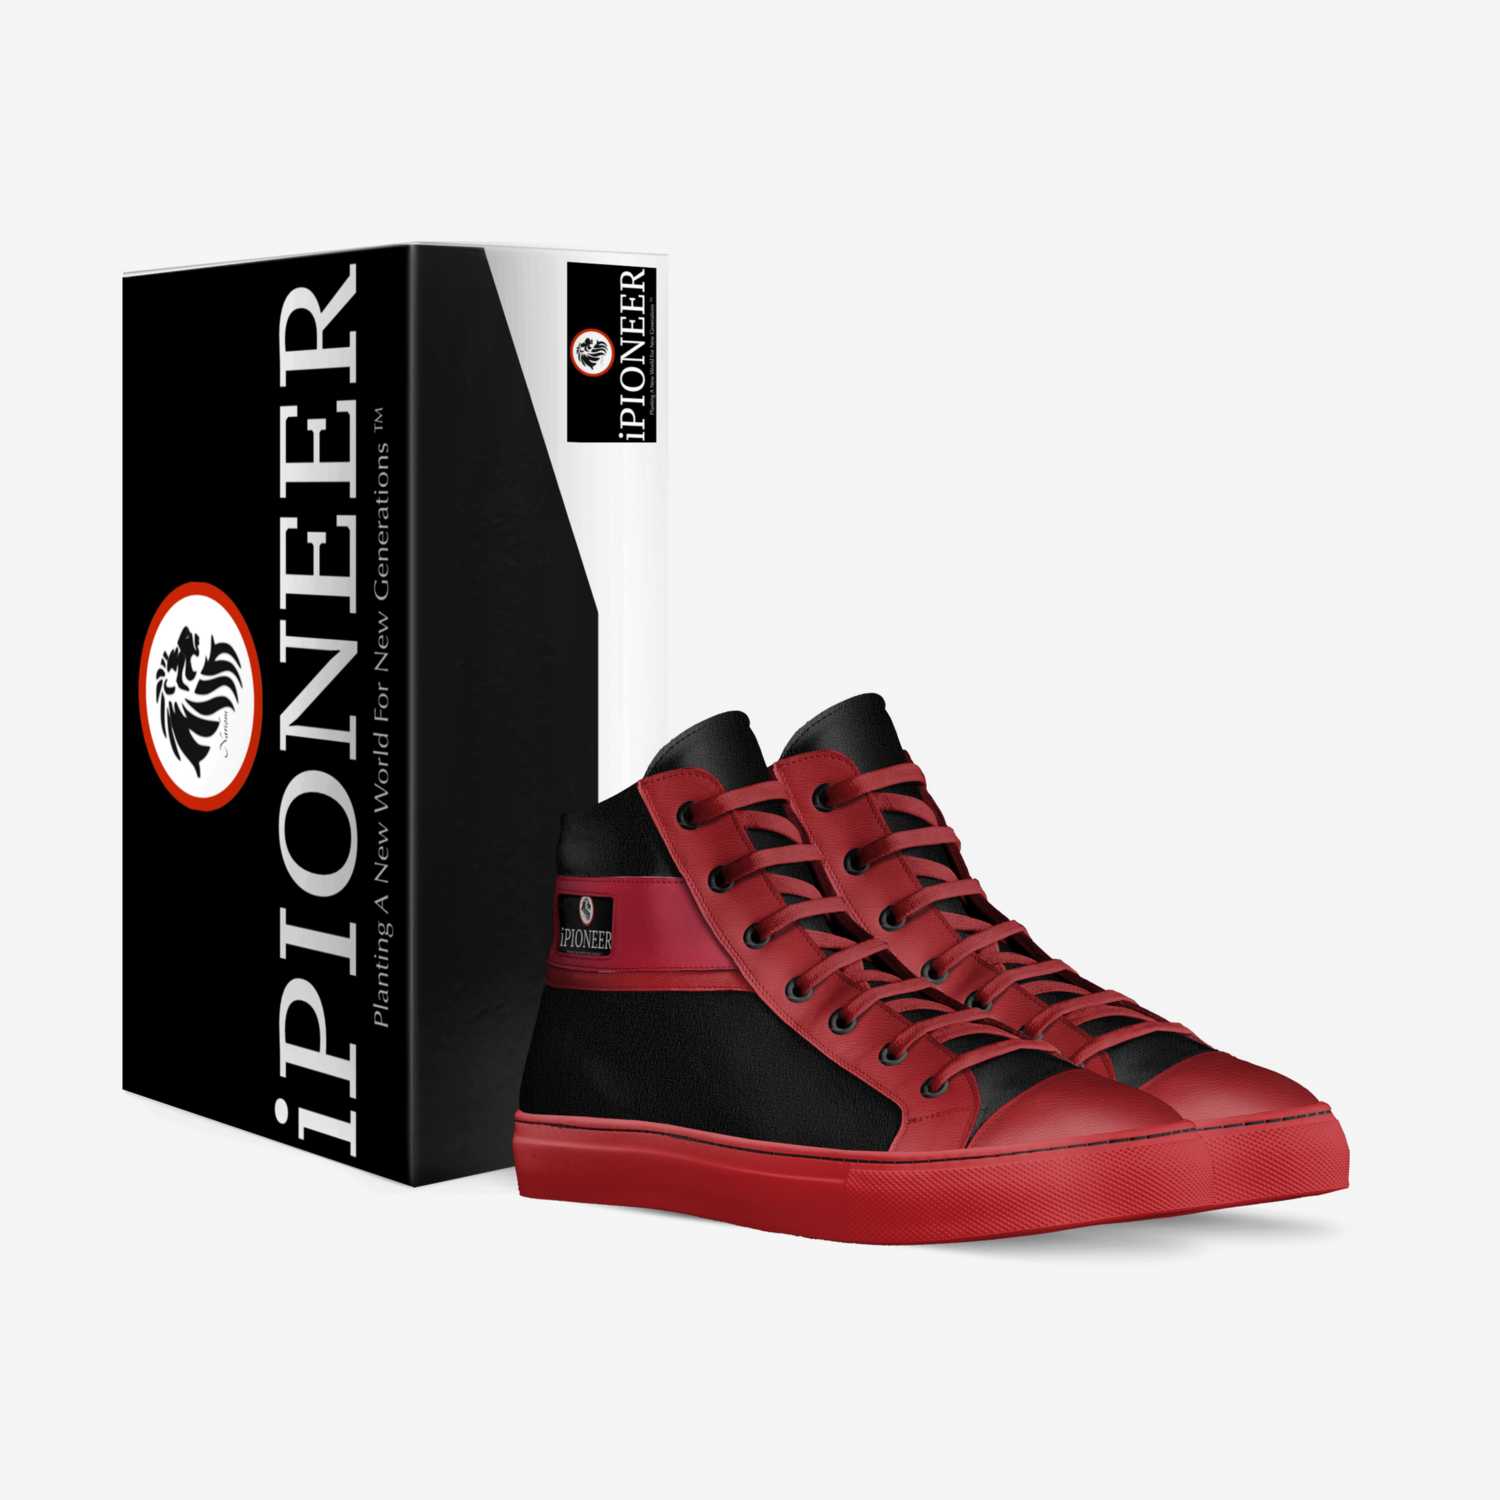 iPioneerReverse custom made in Italy shoes by Marlon D. Hester Sr. | Box view